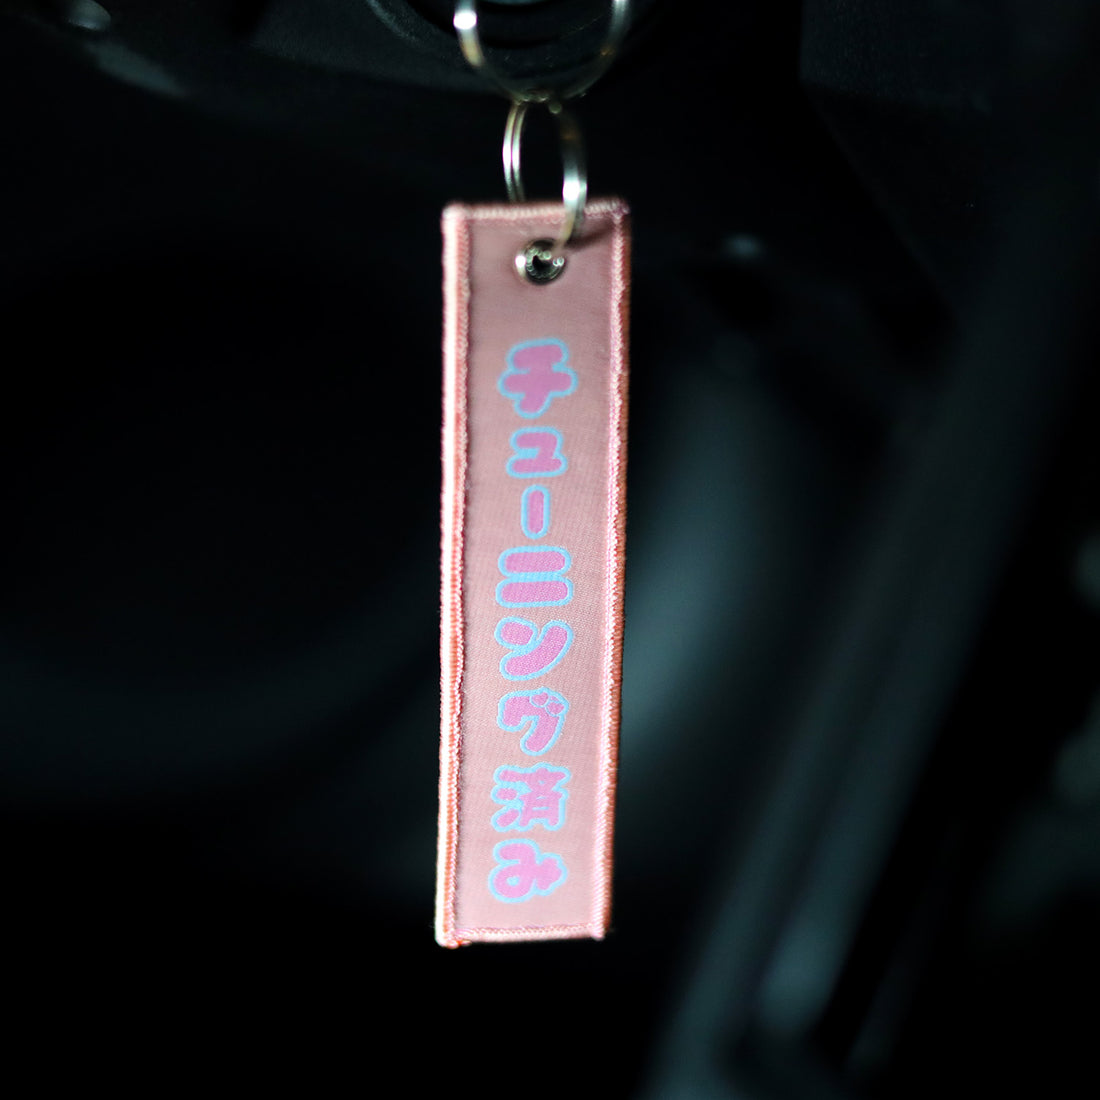 Tuned-Out Cherry Blossom Jettag